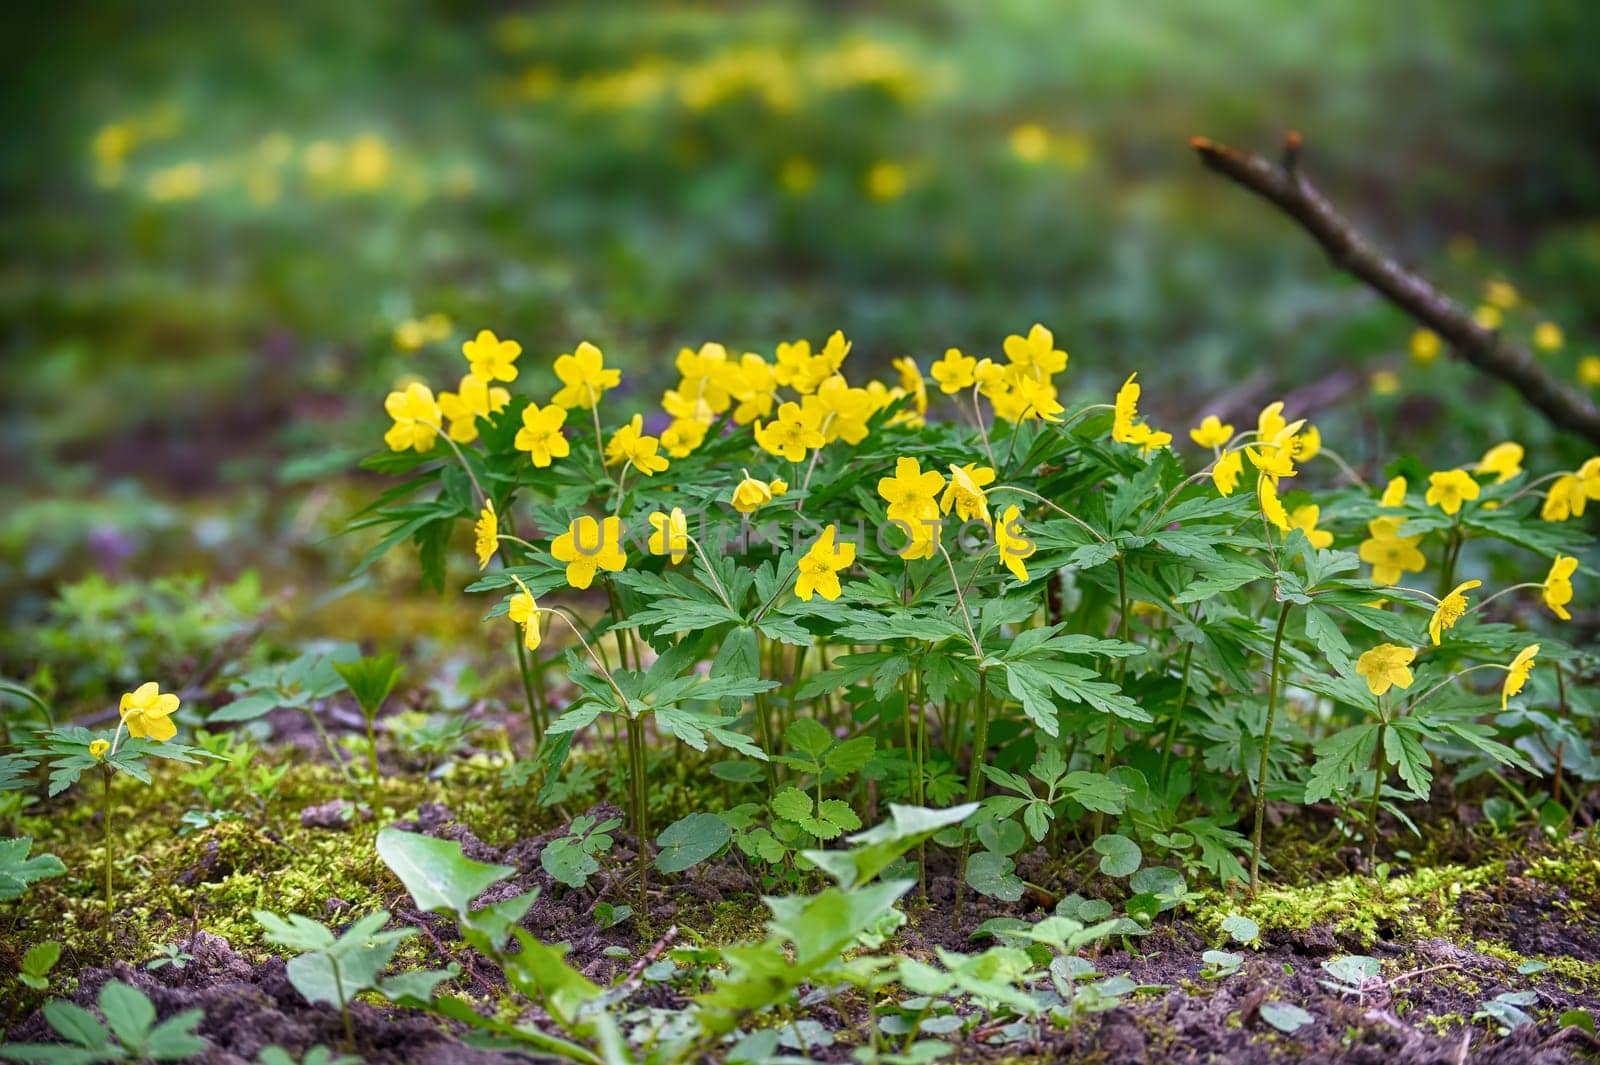 Cluster of yellow marsh marigold flowers growing in a forest setting. These flowers commonly called Caltha palustris, cowslip, king cup or marsh cup